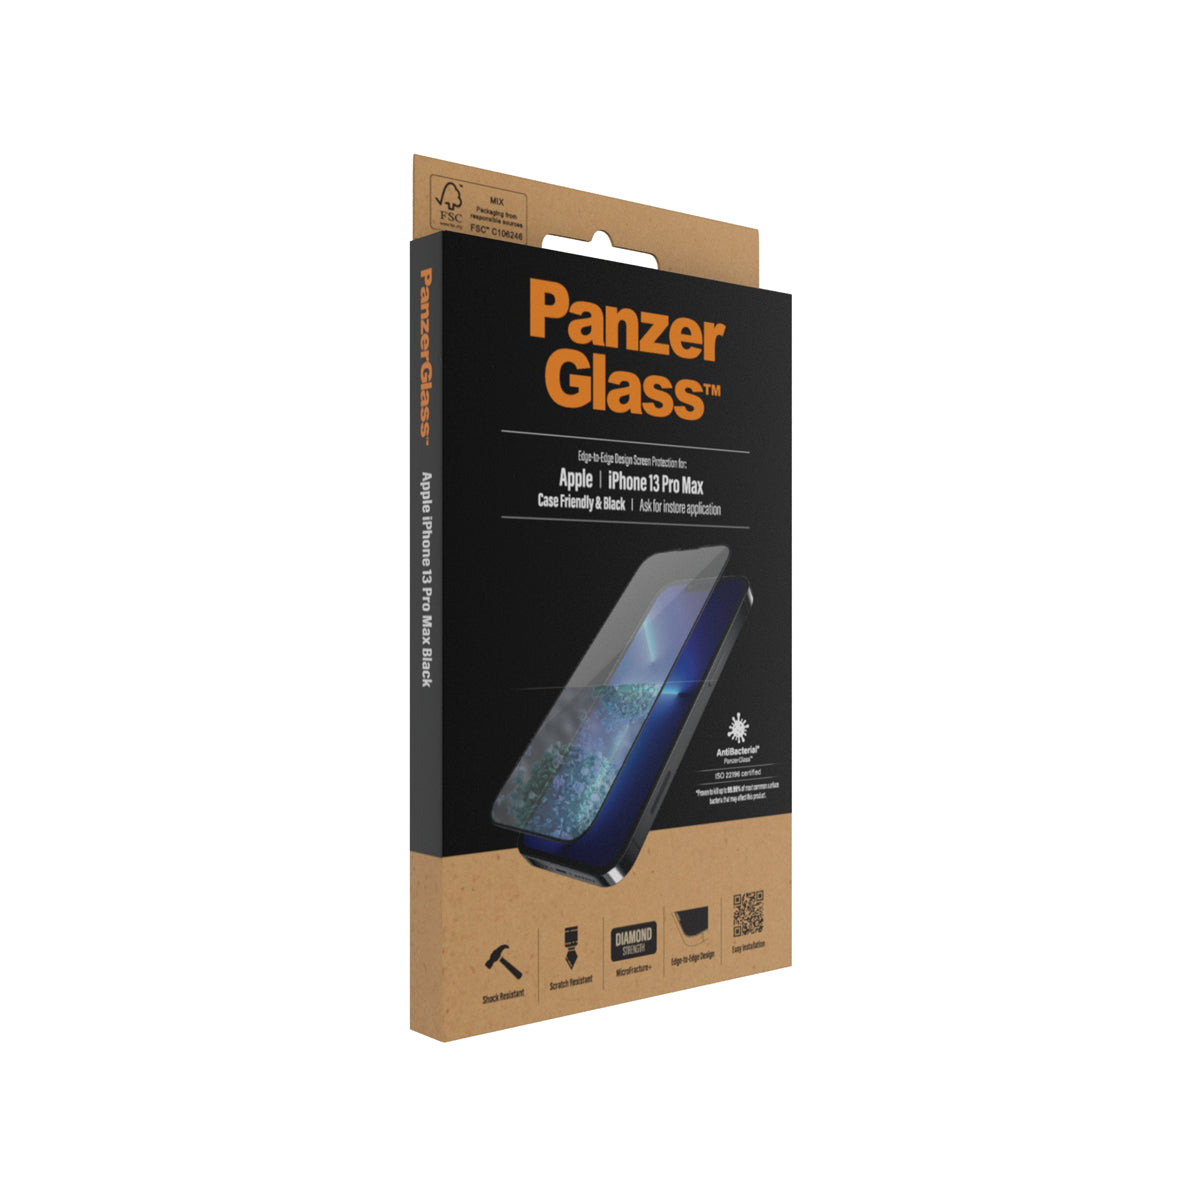 PanzerGlass CaseFriendly Black Phone Screen Protector for iPhone 13 Pro Max - Clear.